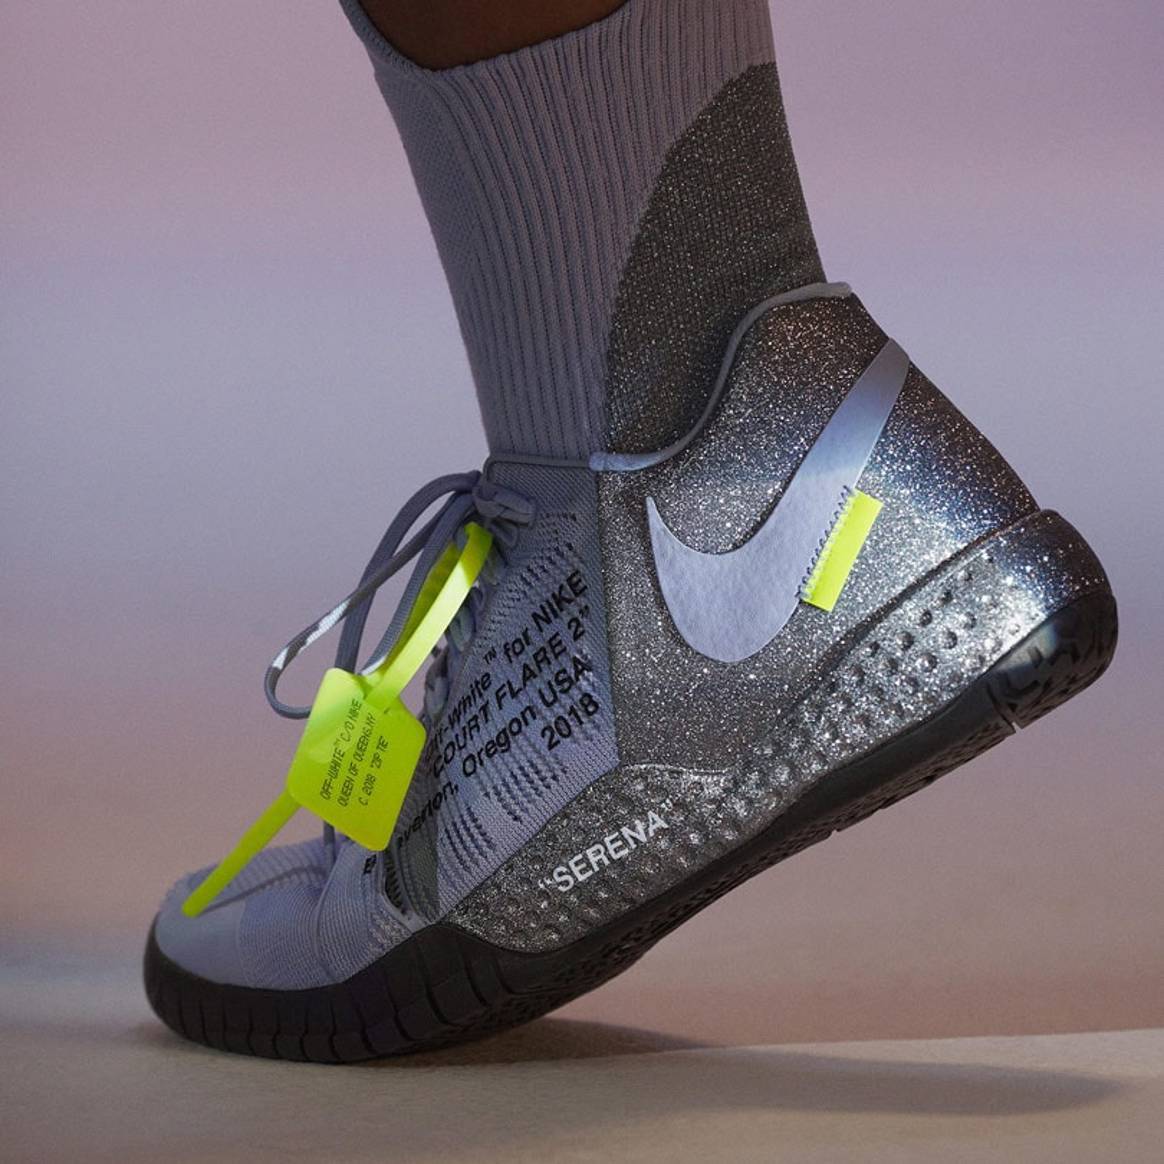 Virgil Abloh designs Nike collection for Serena Williams